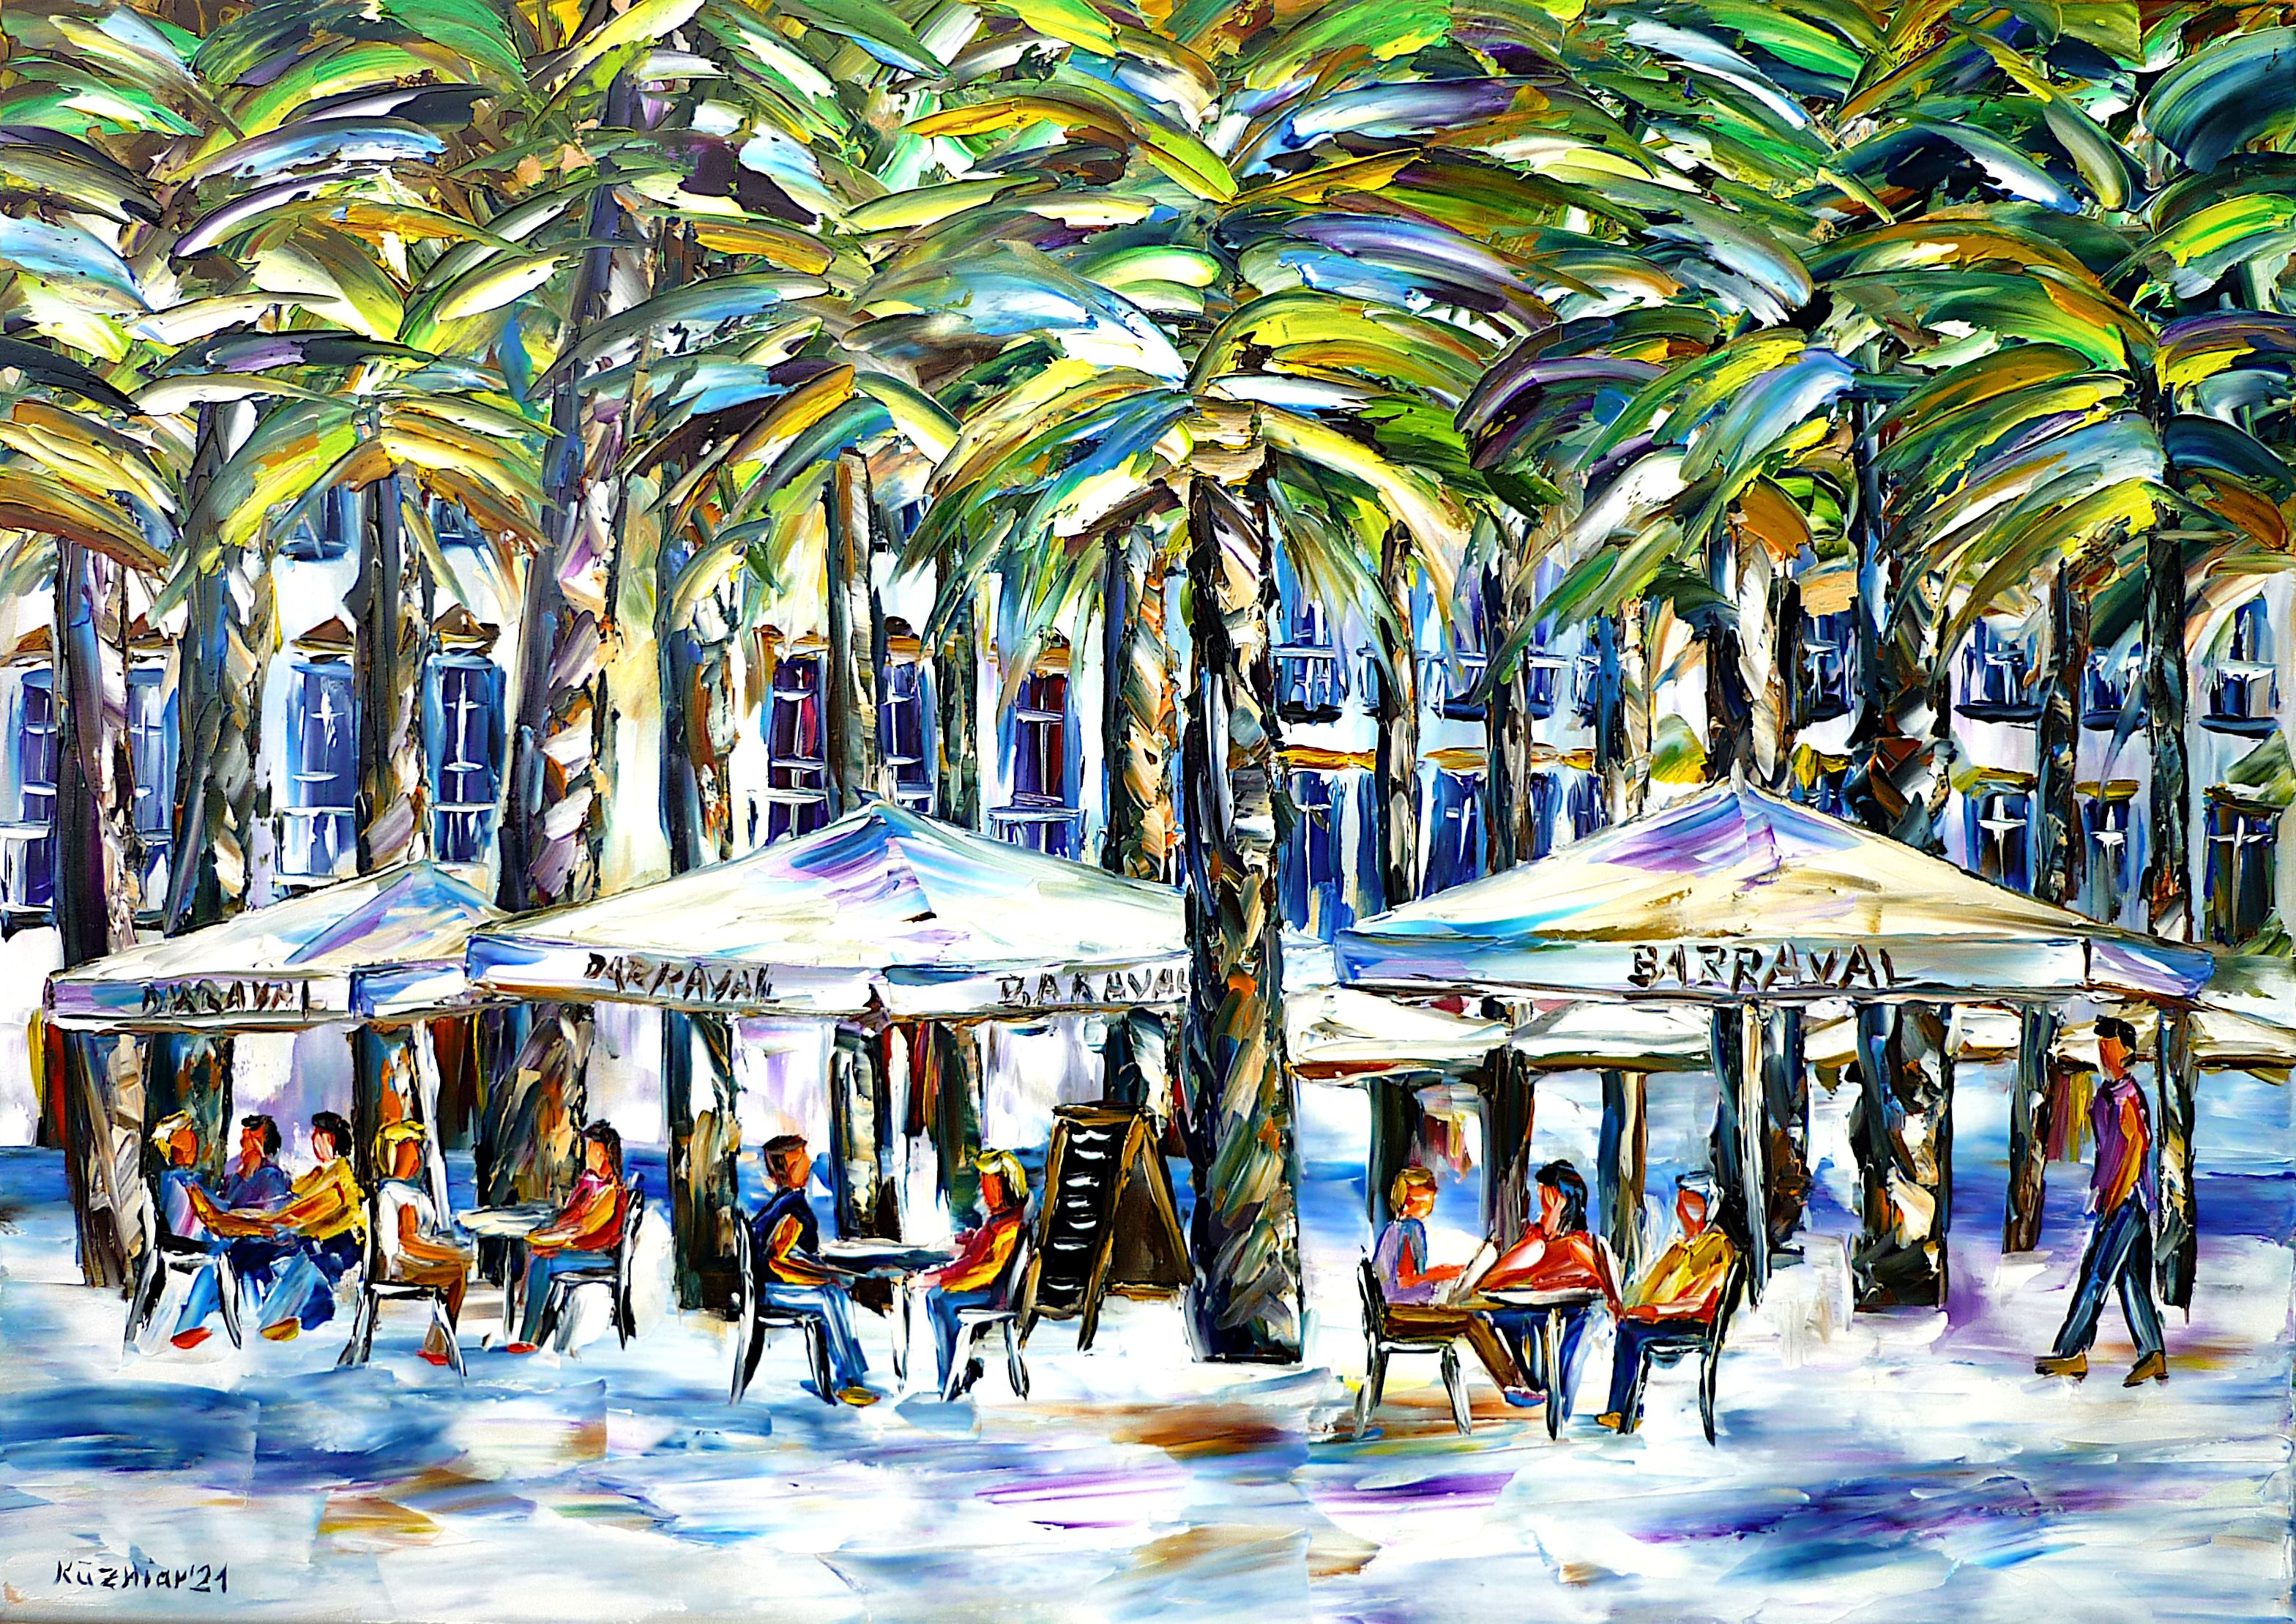 bar el raval barcelona,people in the cafe,sitting outside,cafe in barcelona,sitting in the cafe,cafe parasols,el raval scene,el raval painting,summer in barcelona,cafe scene,sitting under trees,summer feelings,summer painting,barcelona cityscape,cafe outside,street cafe,enjoy summer,people in summer,sunny summer day,warm summer day,beautiful barcelona,i love barcelona,barcelona lovers,summer painting,spain lovers,i love spain,beautiful spain,barcelona city scene,barcelona abstract,colorful barcelona,palette knife oil painting,modern art,impressionism,abstract painting,lively colours,colorful painting,bright colors,light reflections,impasto painting,figurative